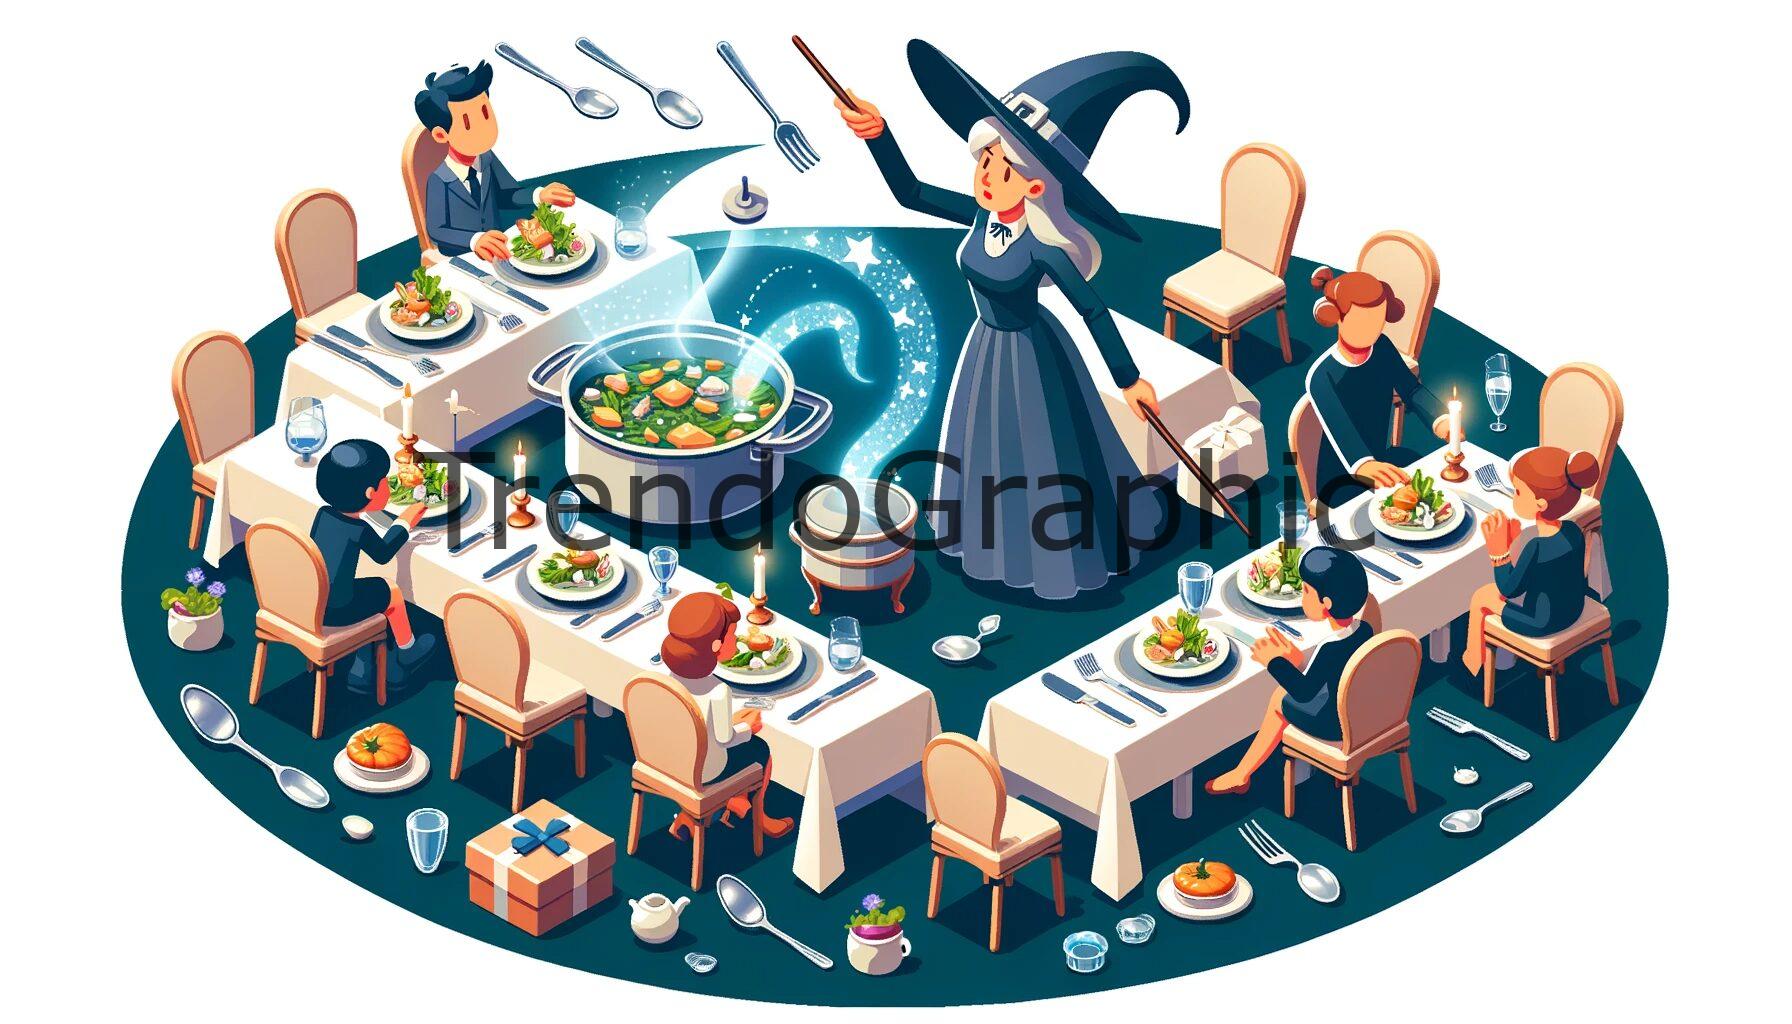 Enchanted Soirée: A Witch’s Mystical Dinner Gathering